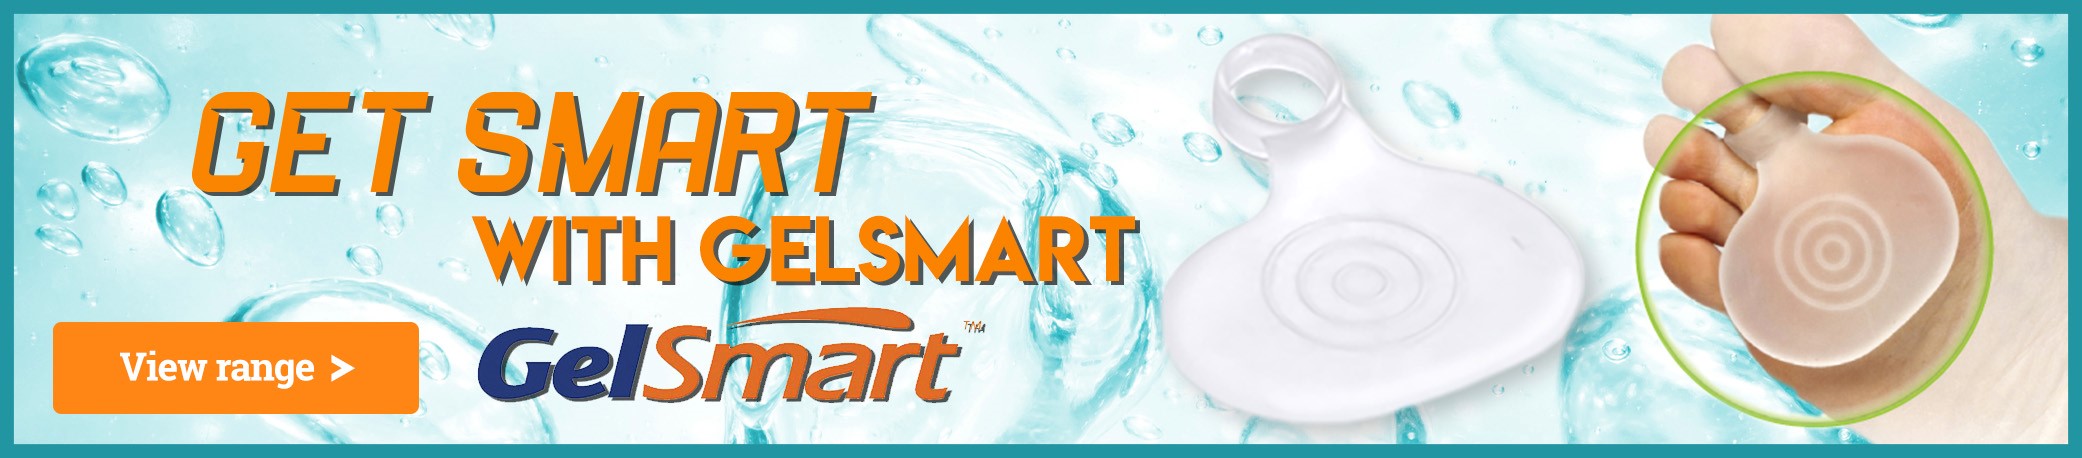 GelSmart: Smart Protection for Your Feet